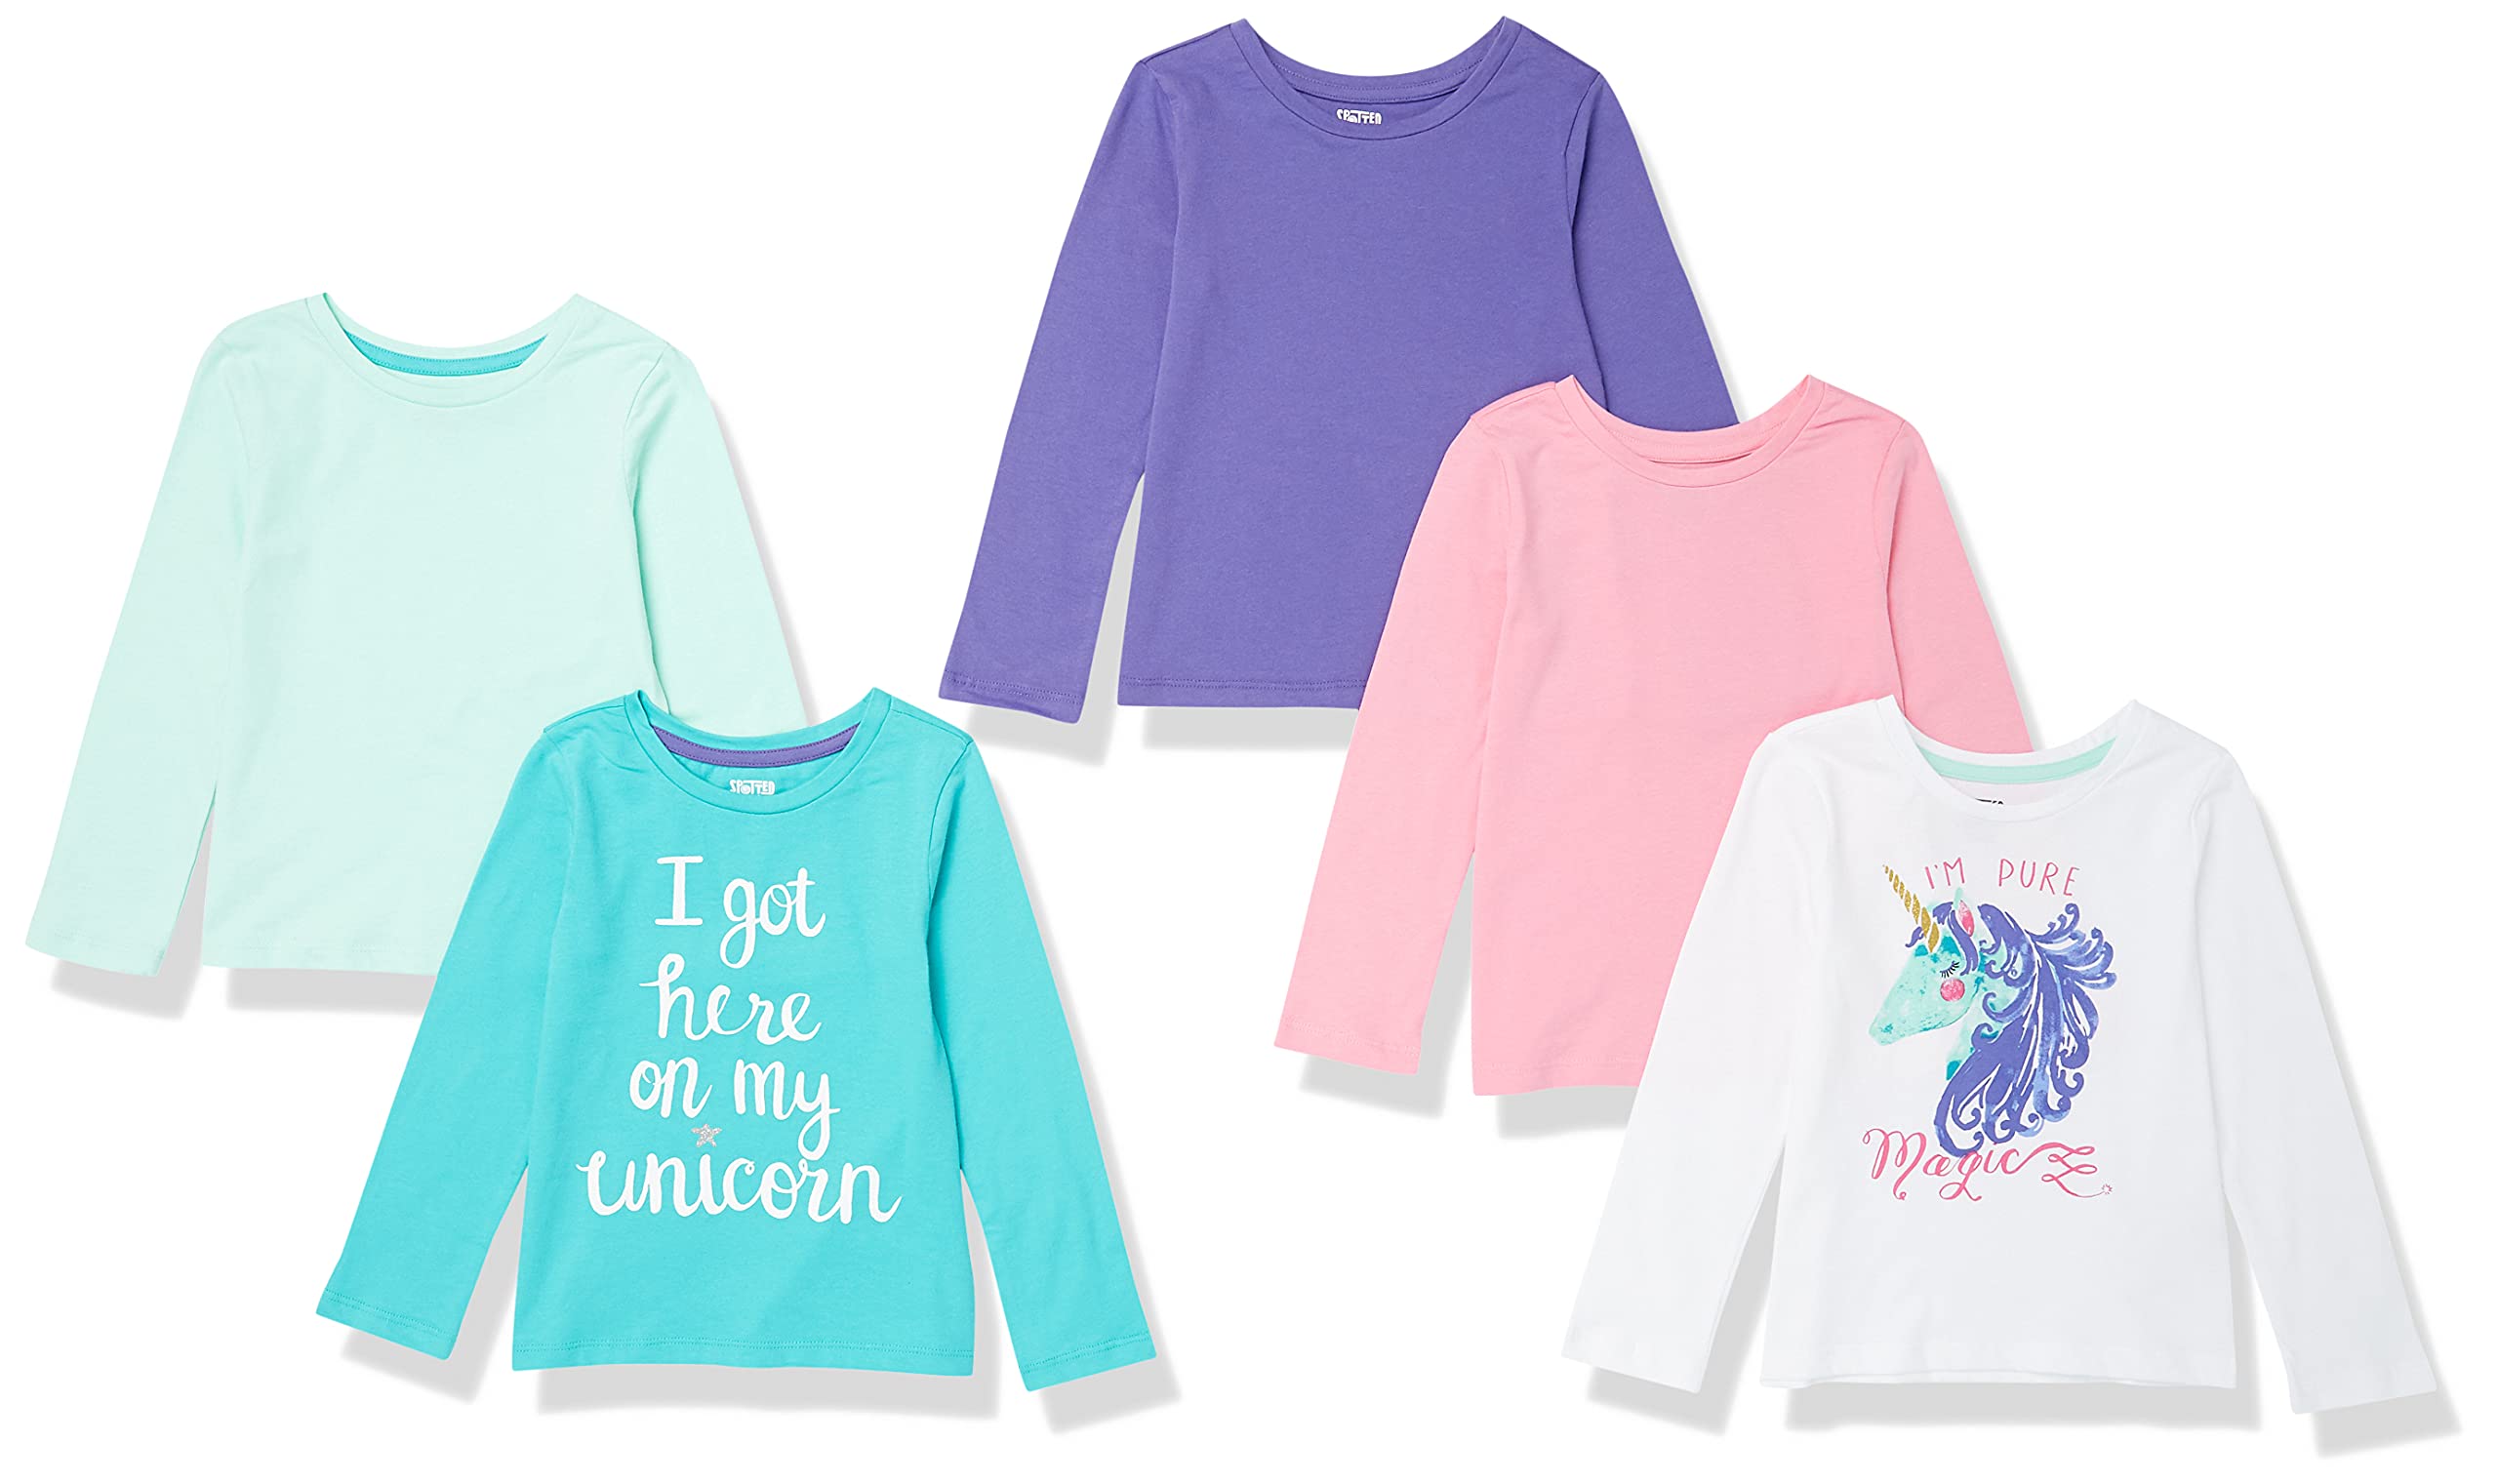 Amazon Essentials Girls and Toddlers' Long-Sleeve T-Shirts (Previously Spotted Zebra), Multipacks